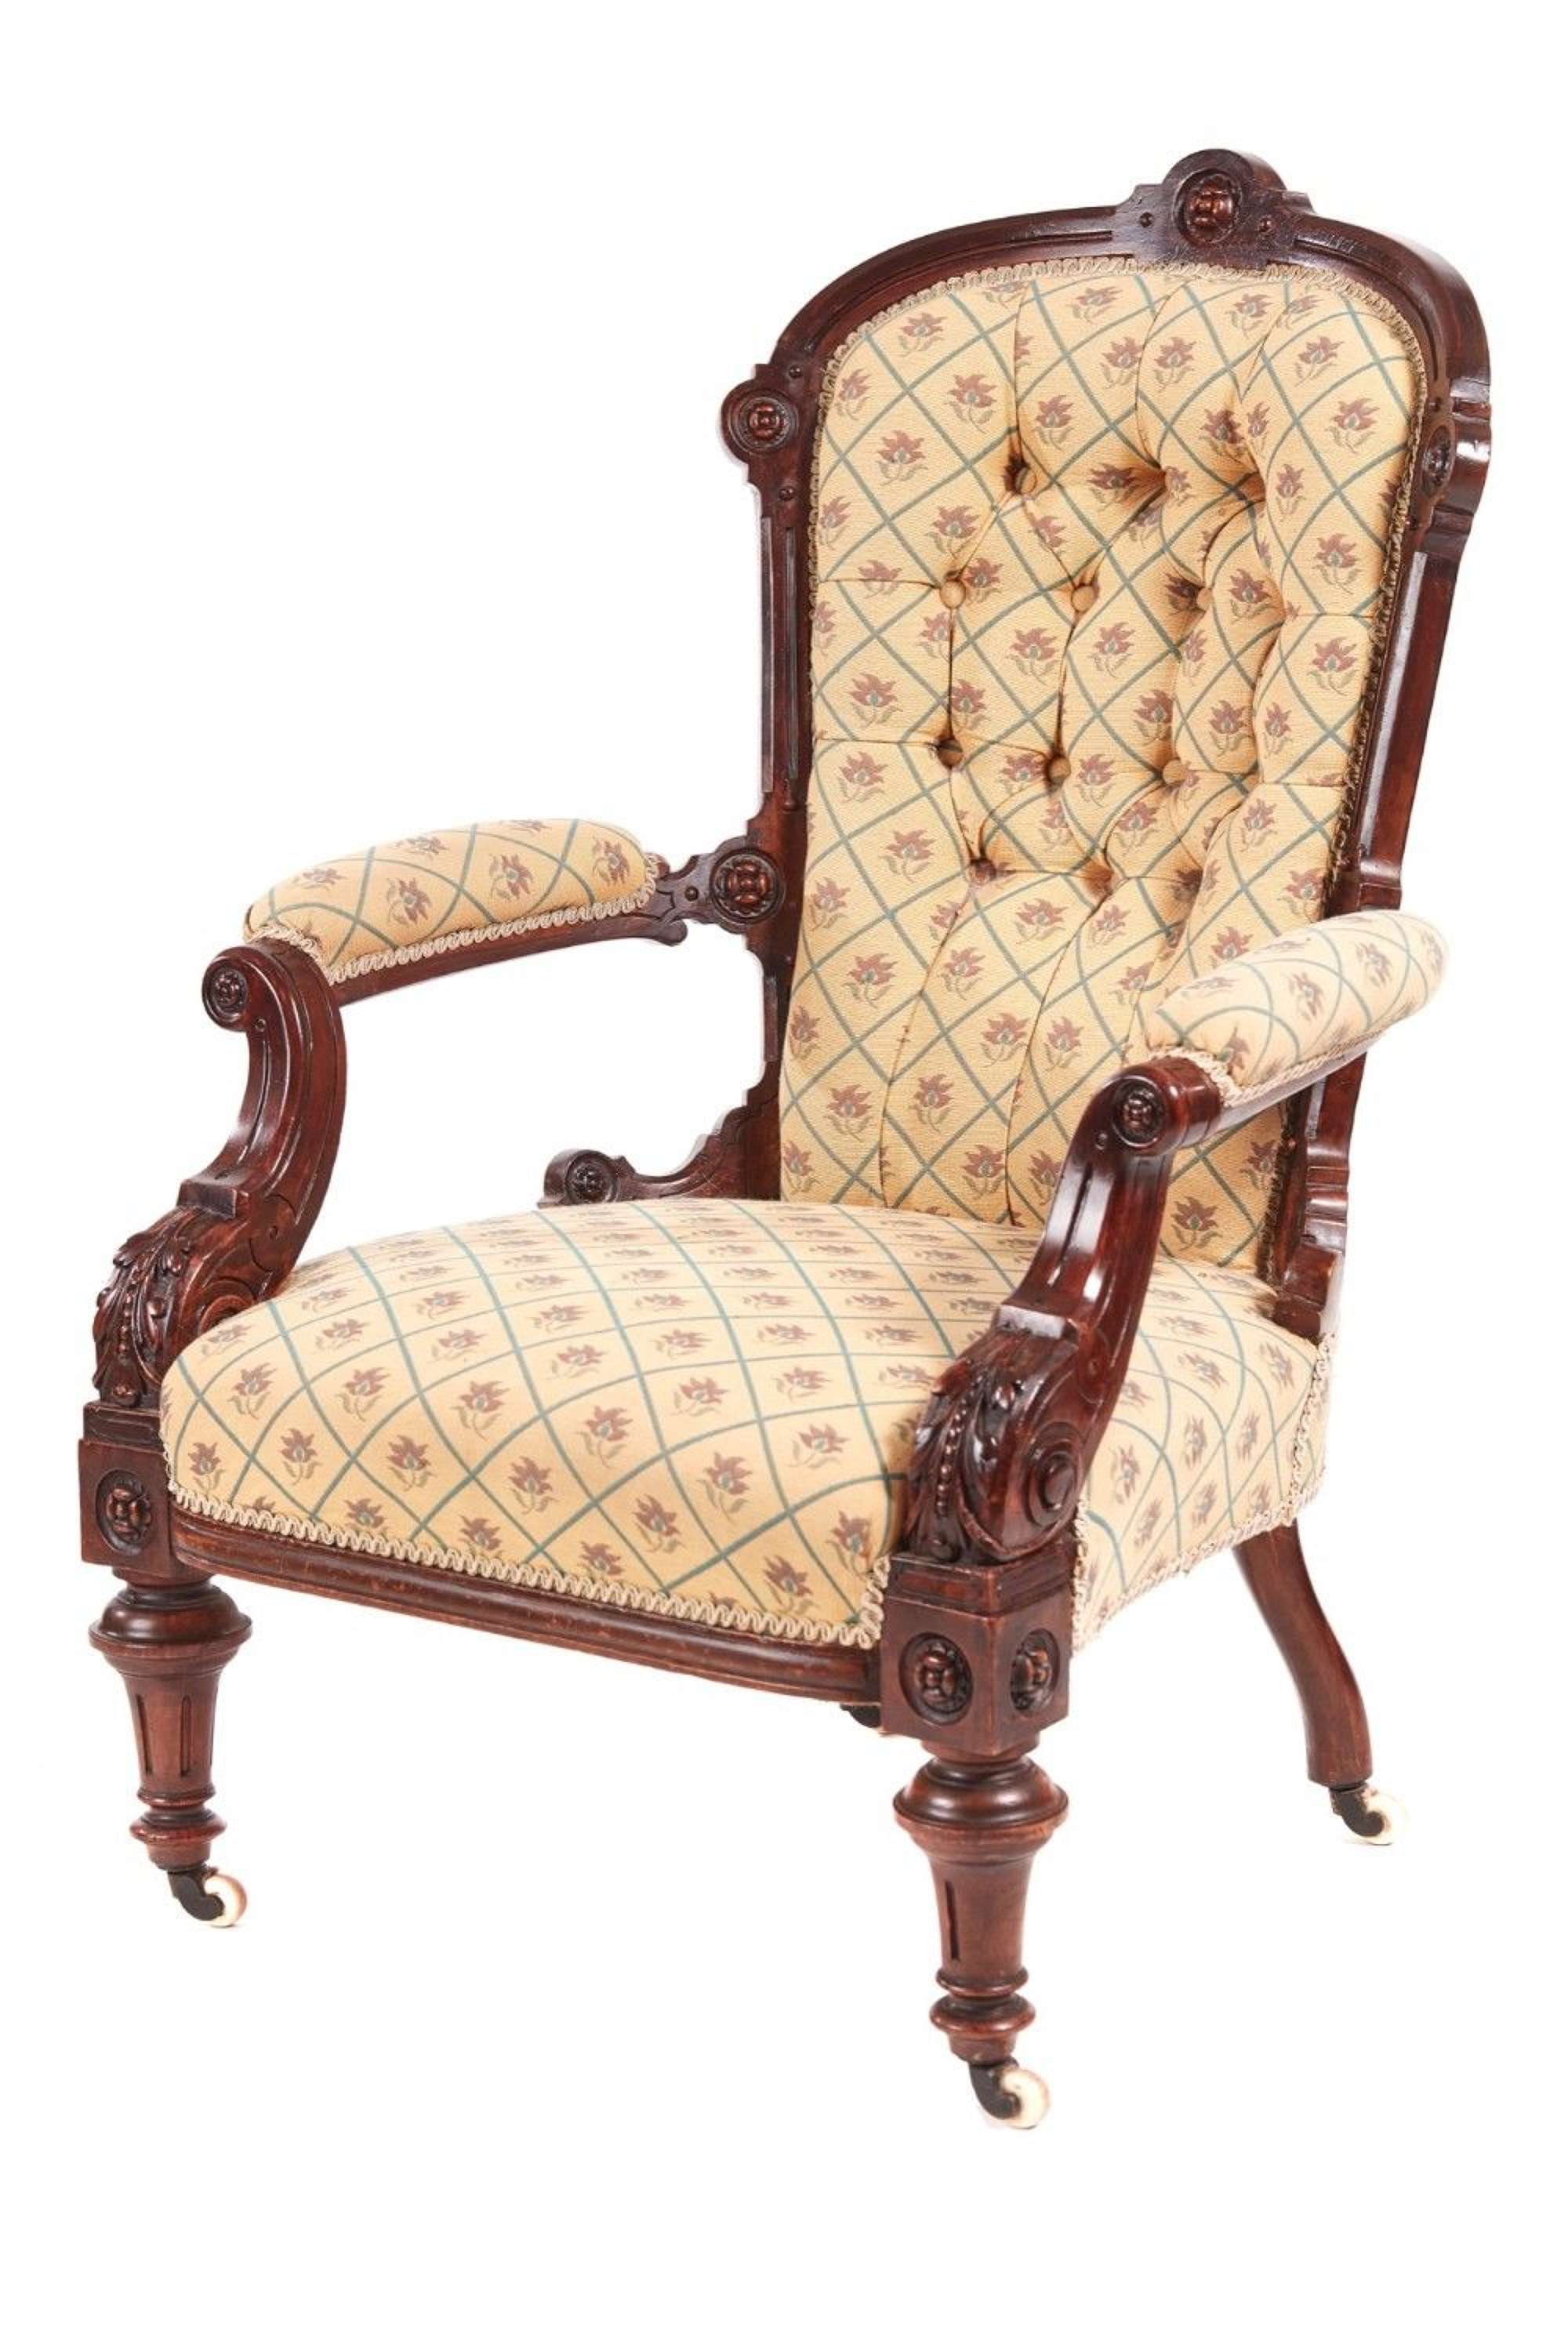 Quality Victorian Carved Walnut Turned Leg Antique Armchair